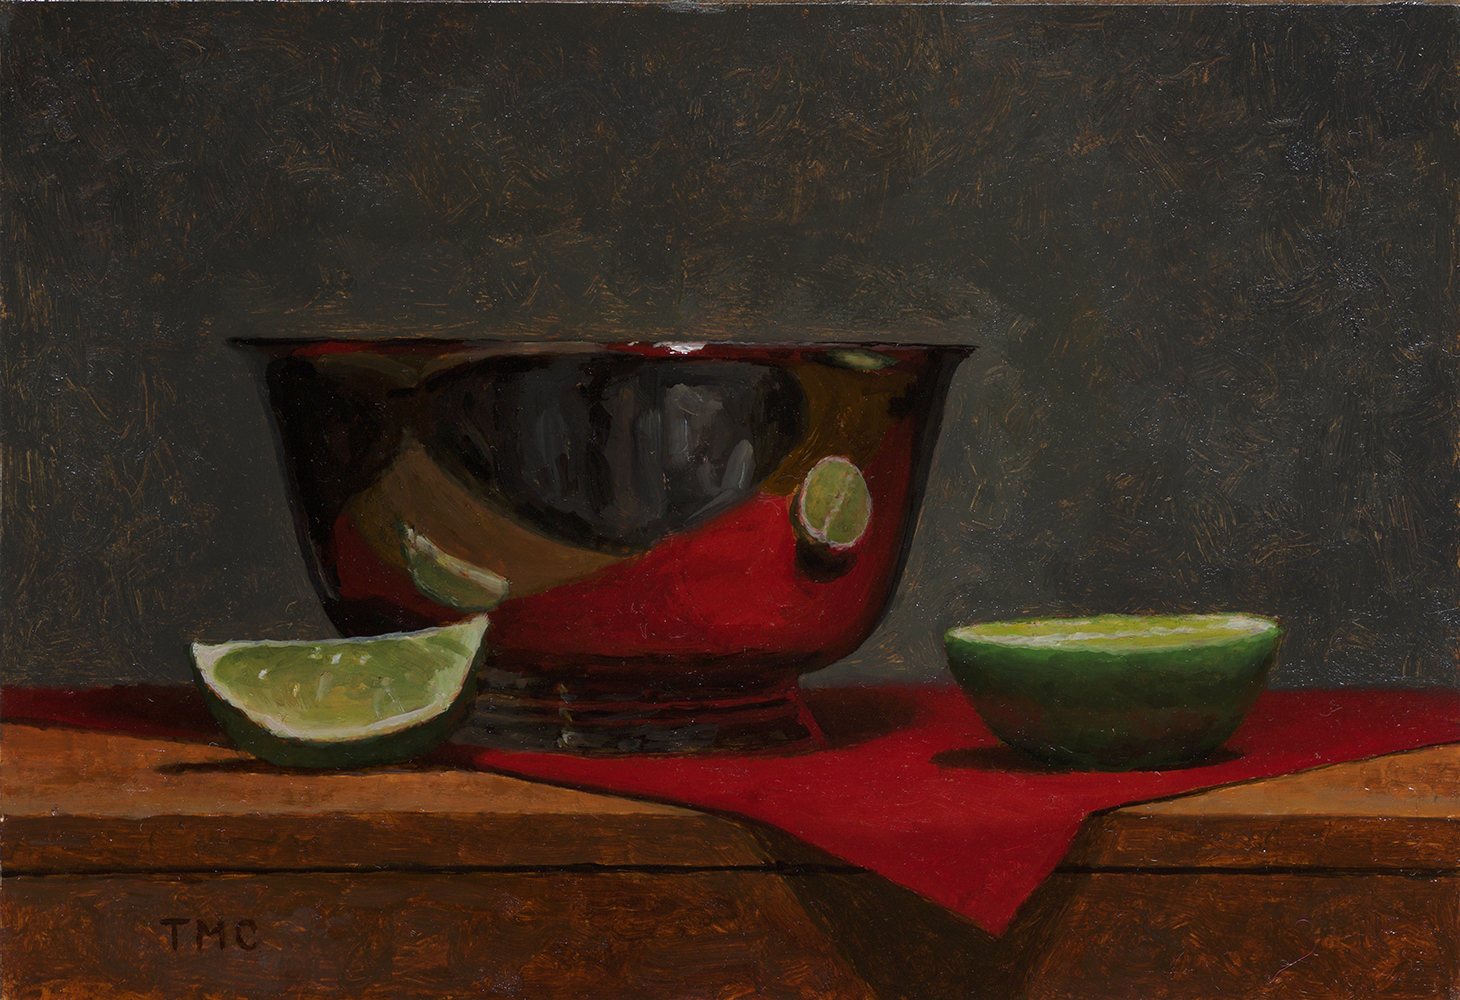 Bowl with Limes - Casey Todd M.